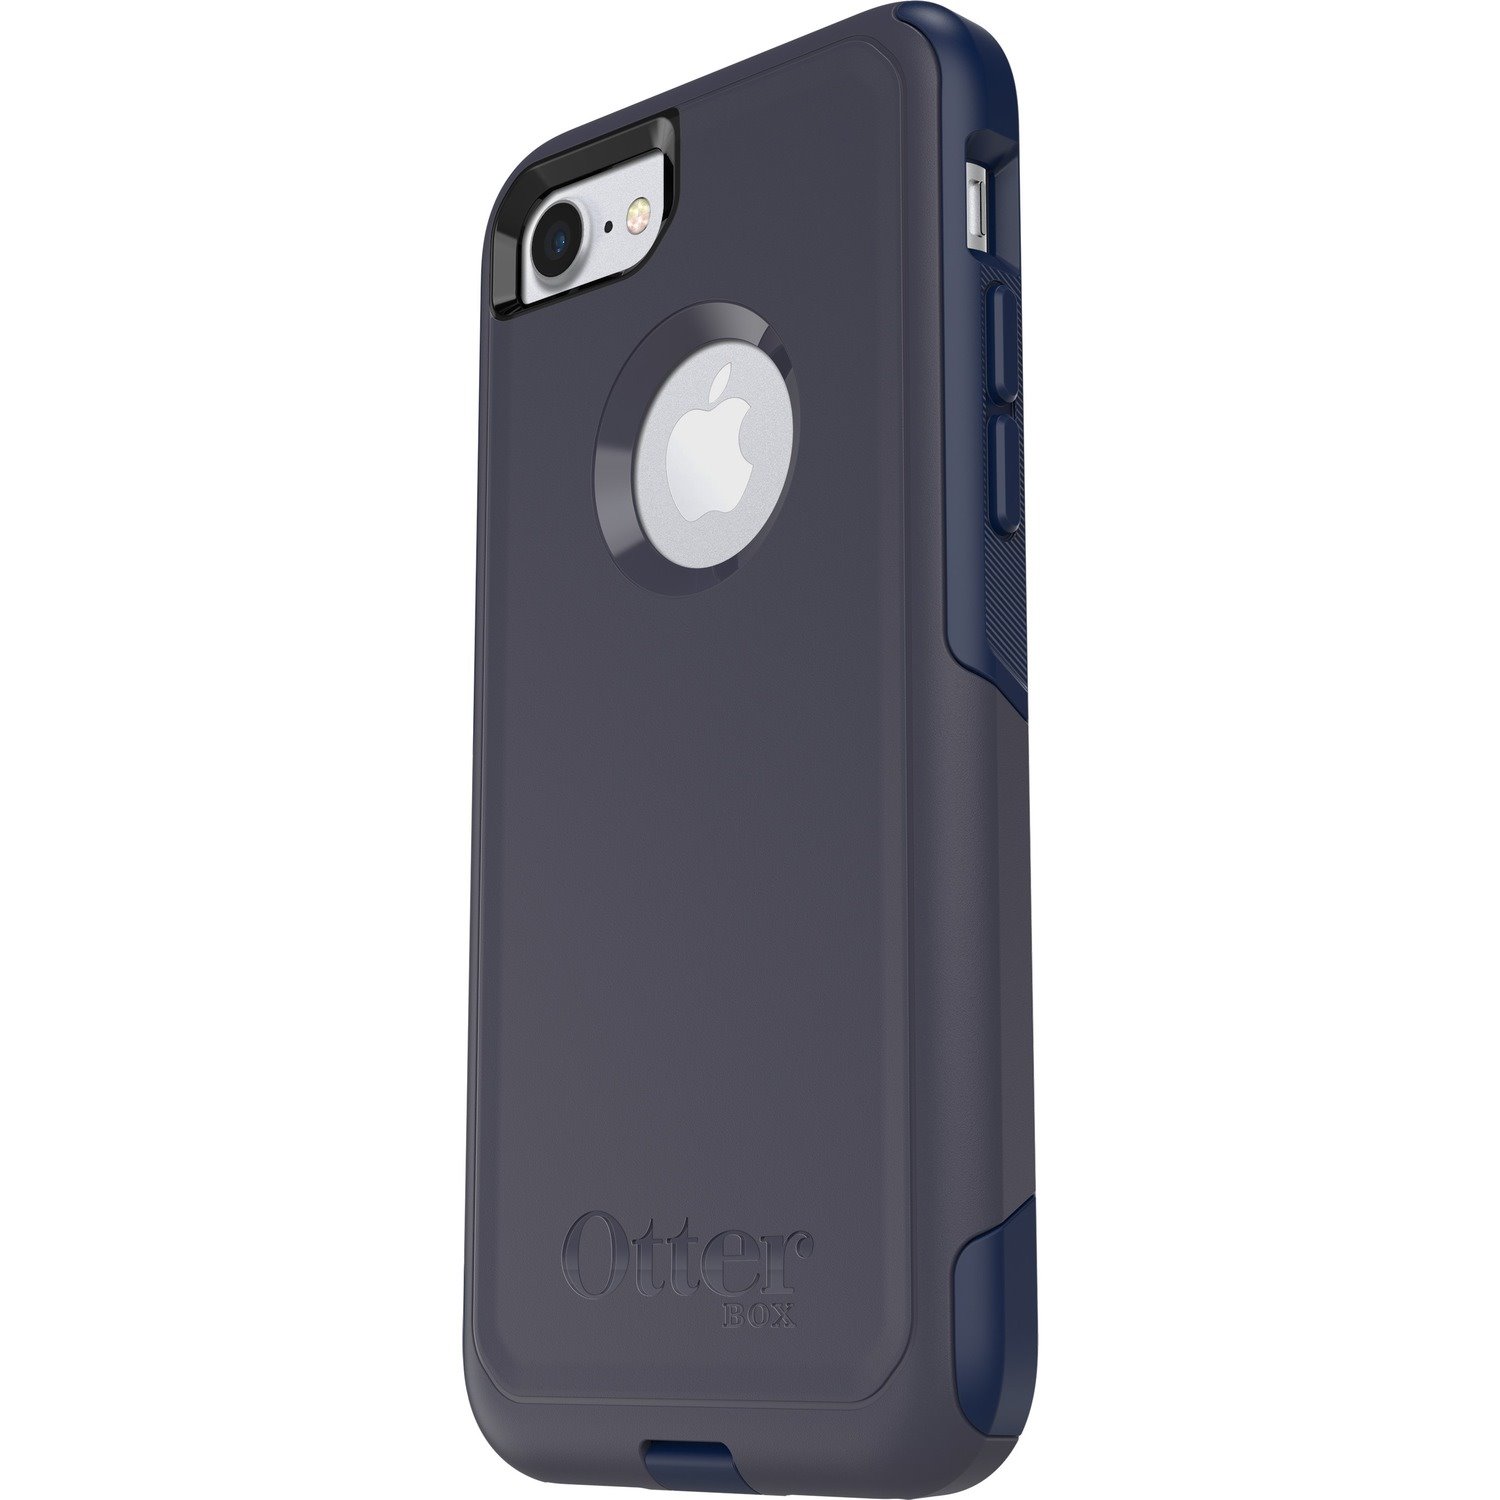 OtterBox Commuter Case for Apple iPhone 7, iPhone 8 Smartphone - Indigo Way